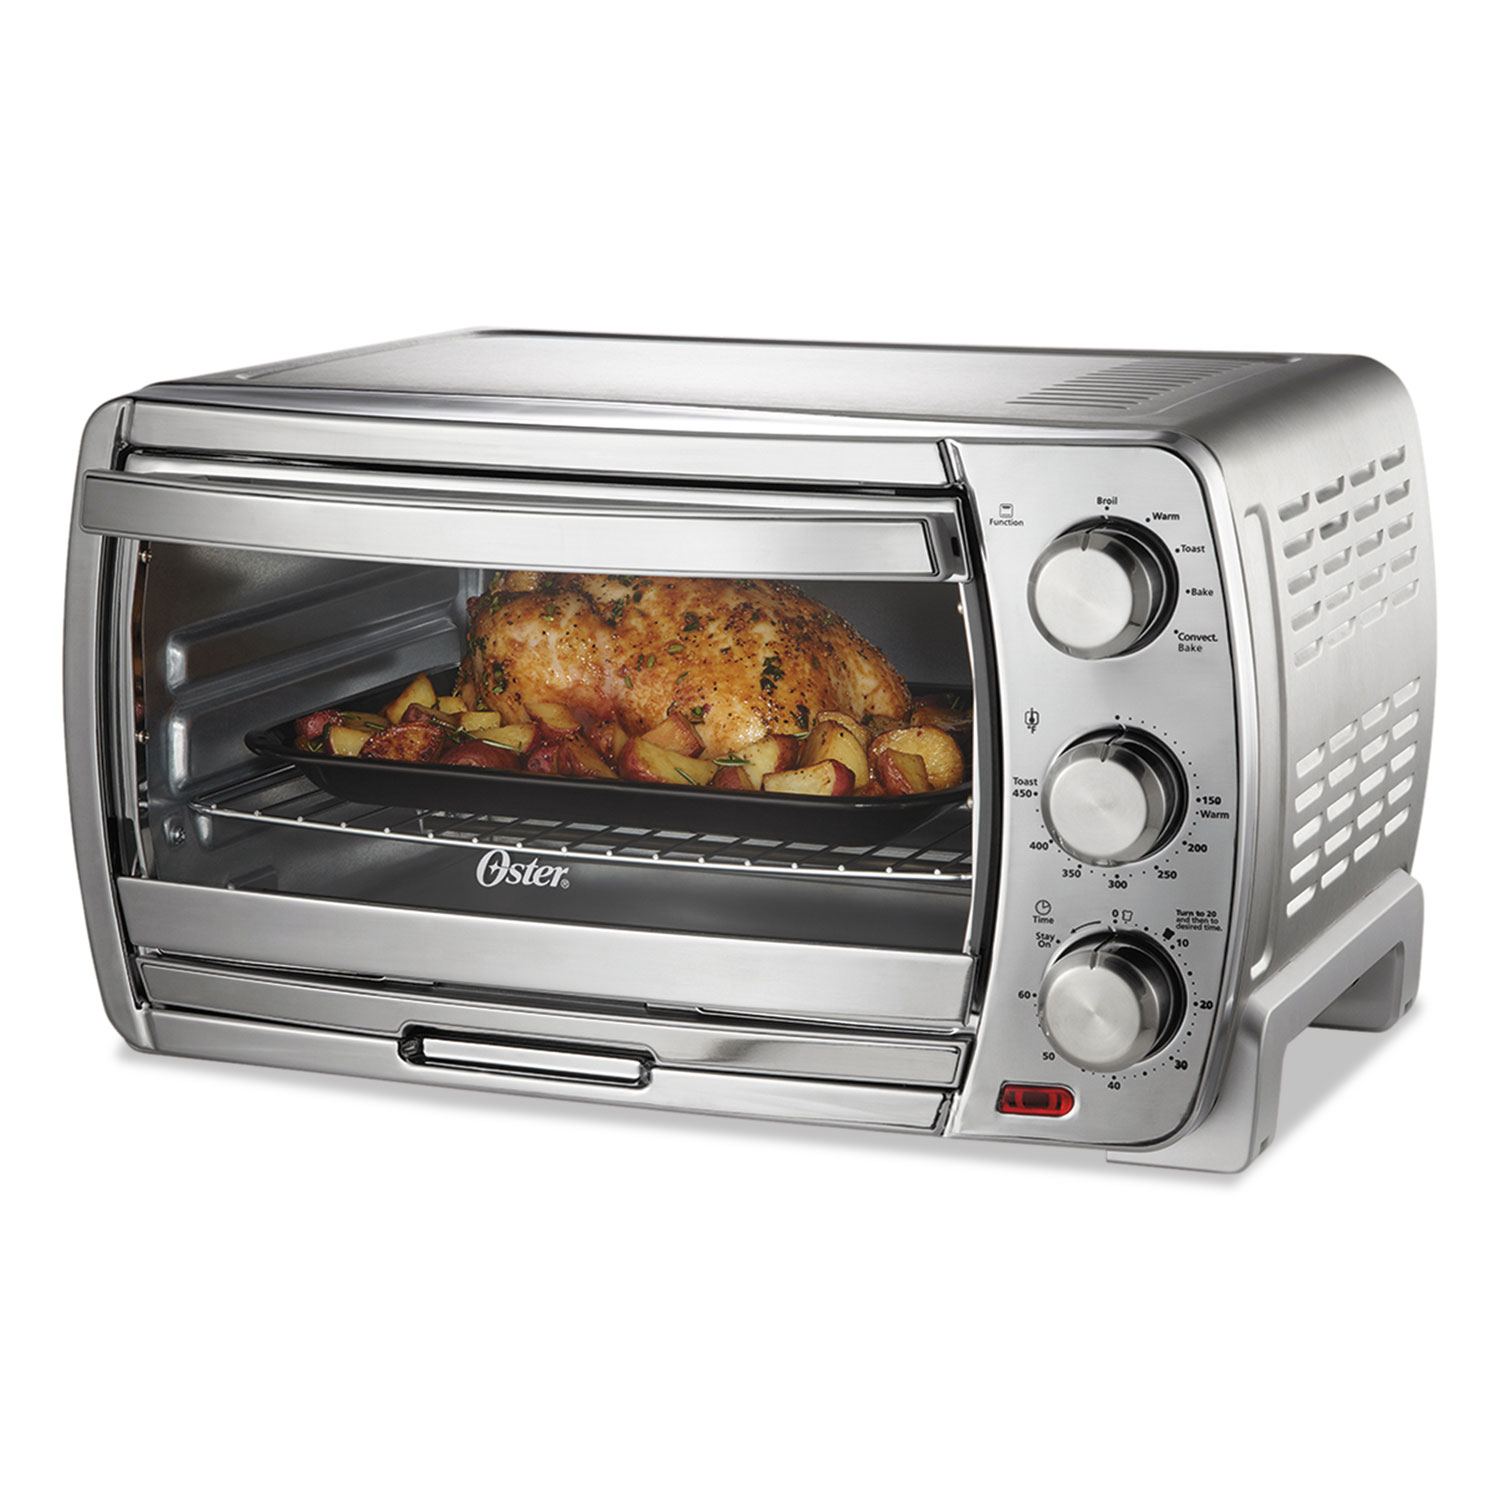  Oster TSSTTVSK01 Extra Large Countertop Convection Oven, 18.8 x 22 1/2 x 14.1, Stainless Steel (OSRVSK01) 